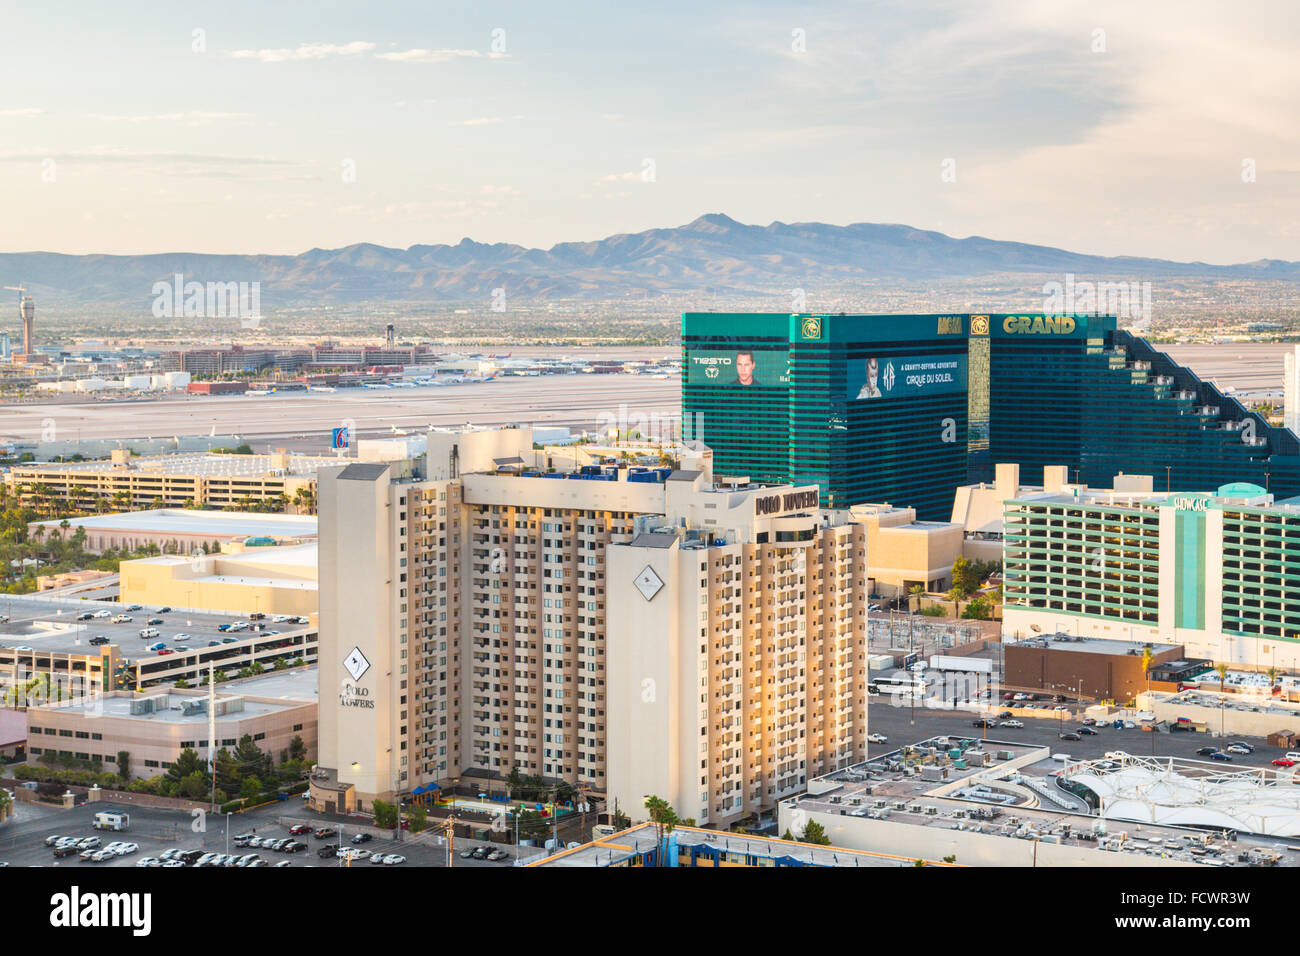 LAS VEGAS, NEVADA - MAY 8, 2014: Pictured here is a view across Las Vegas with Maccarren International Airport and resort casino Stock Photo